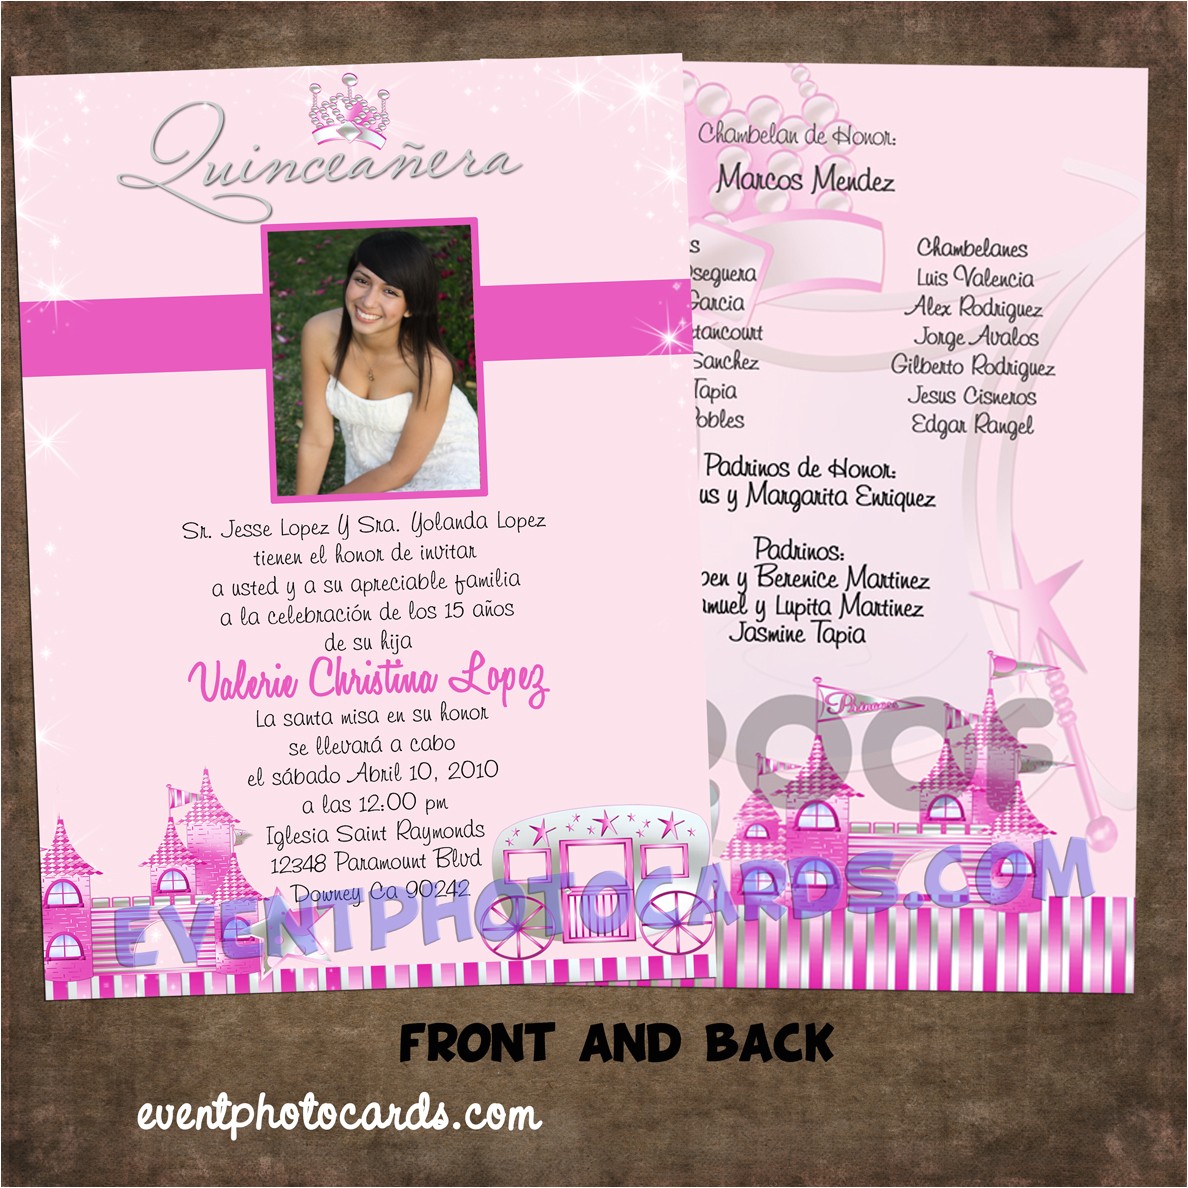 Quinceanera Invitations with Picture event Photo Cards Beautiful Quinceaner...